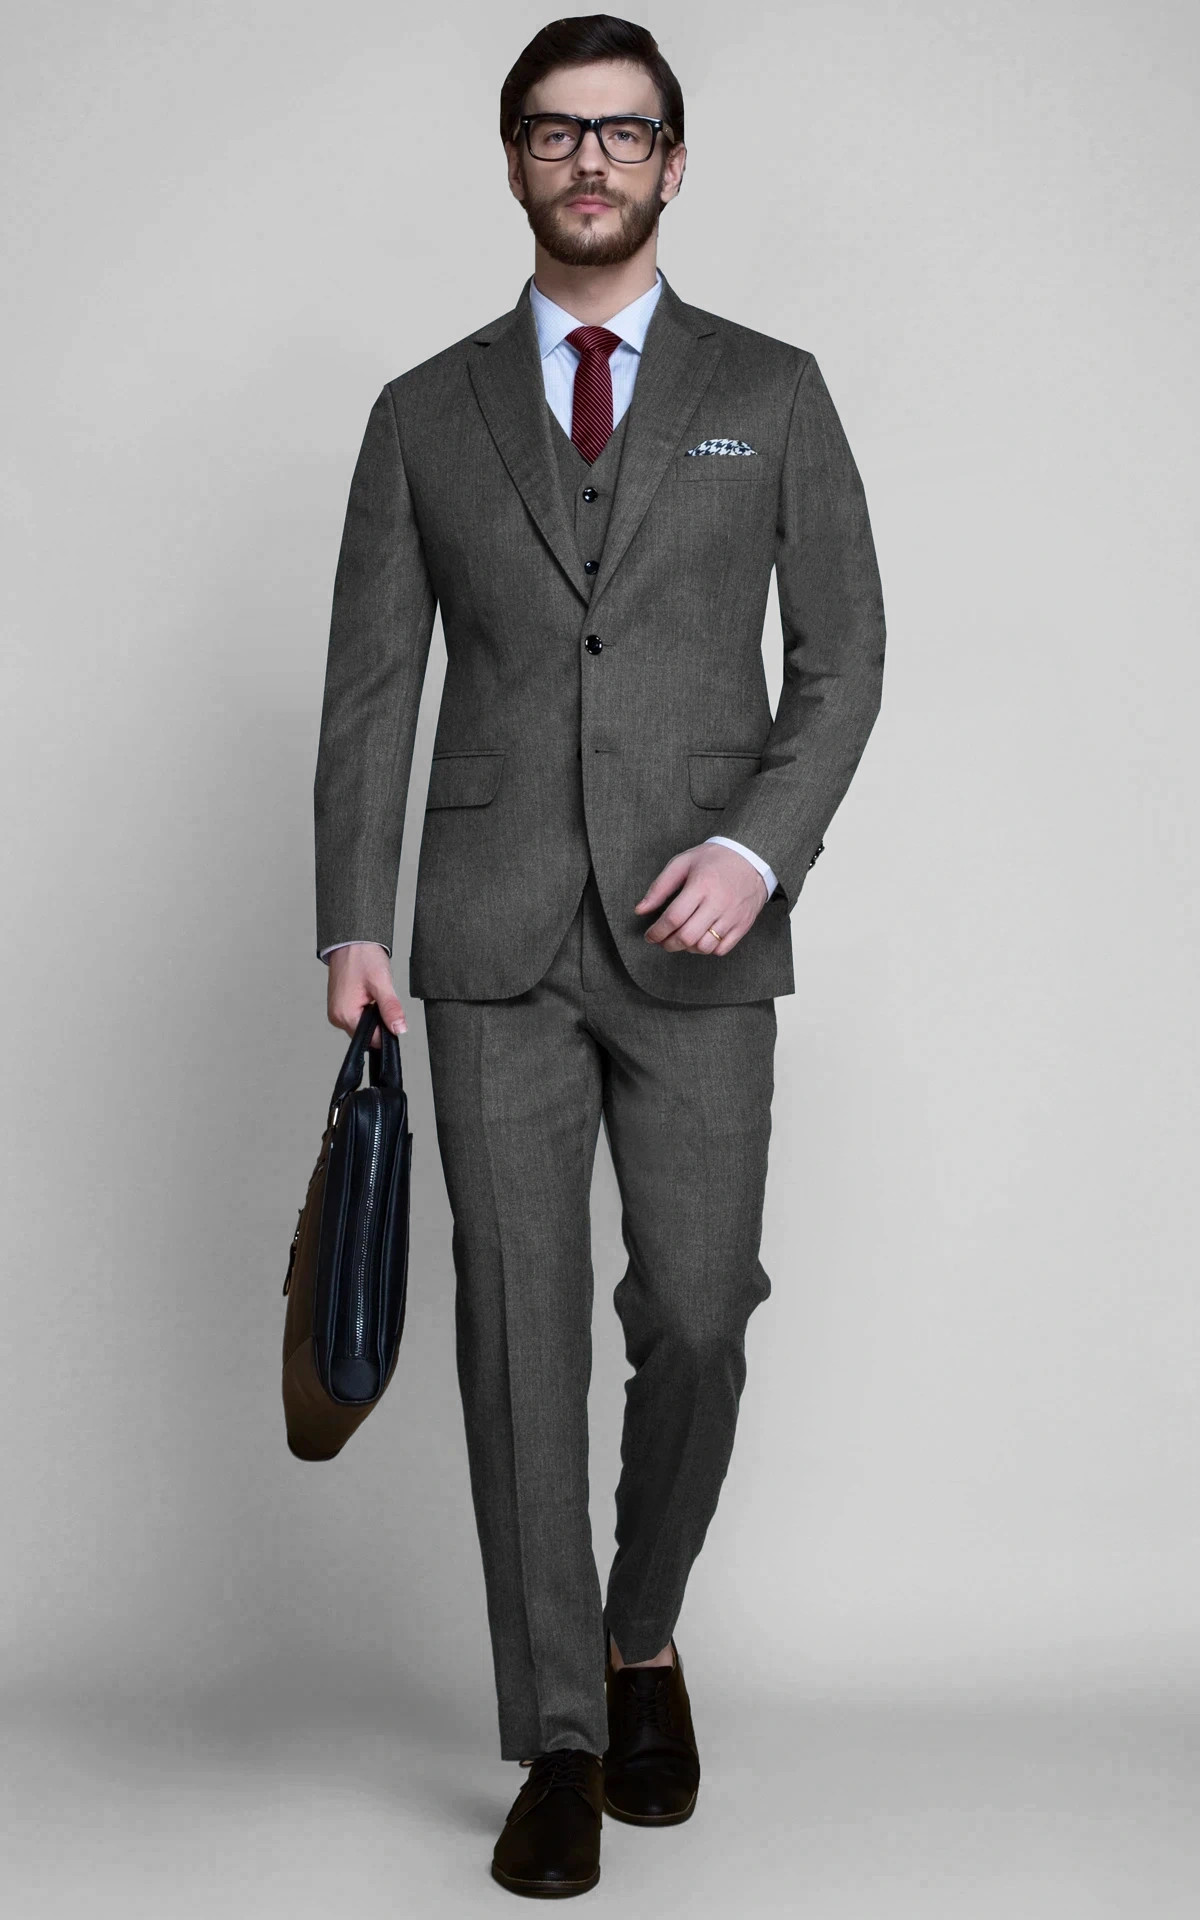 Custom Suits Online, Sustainably tailored by A.i.